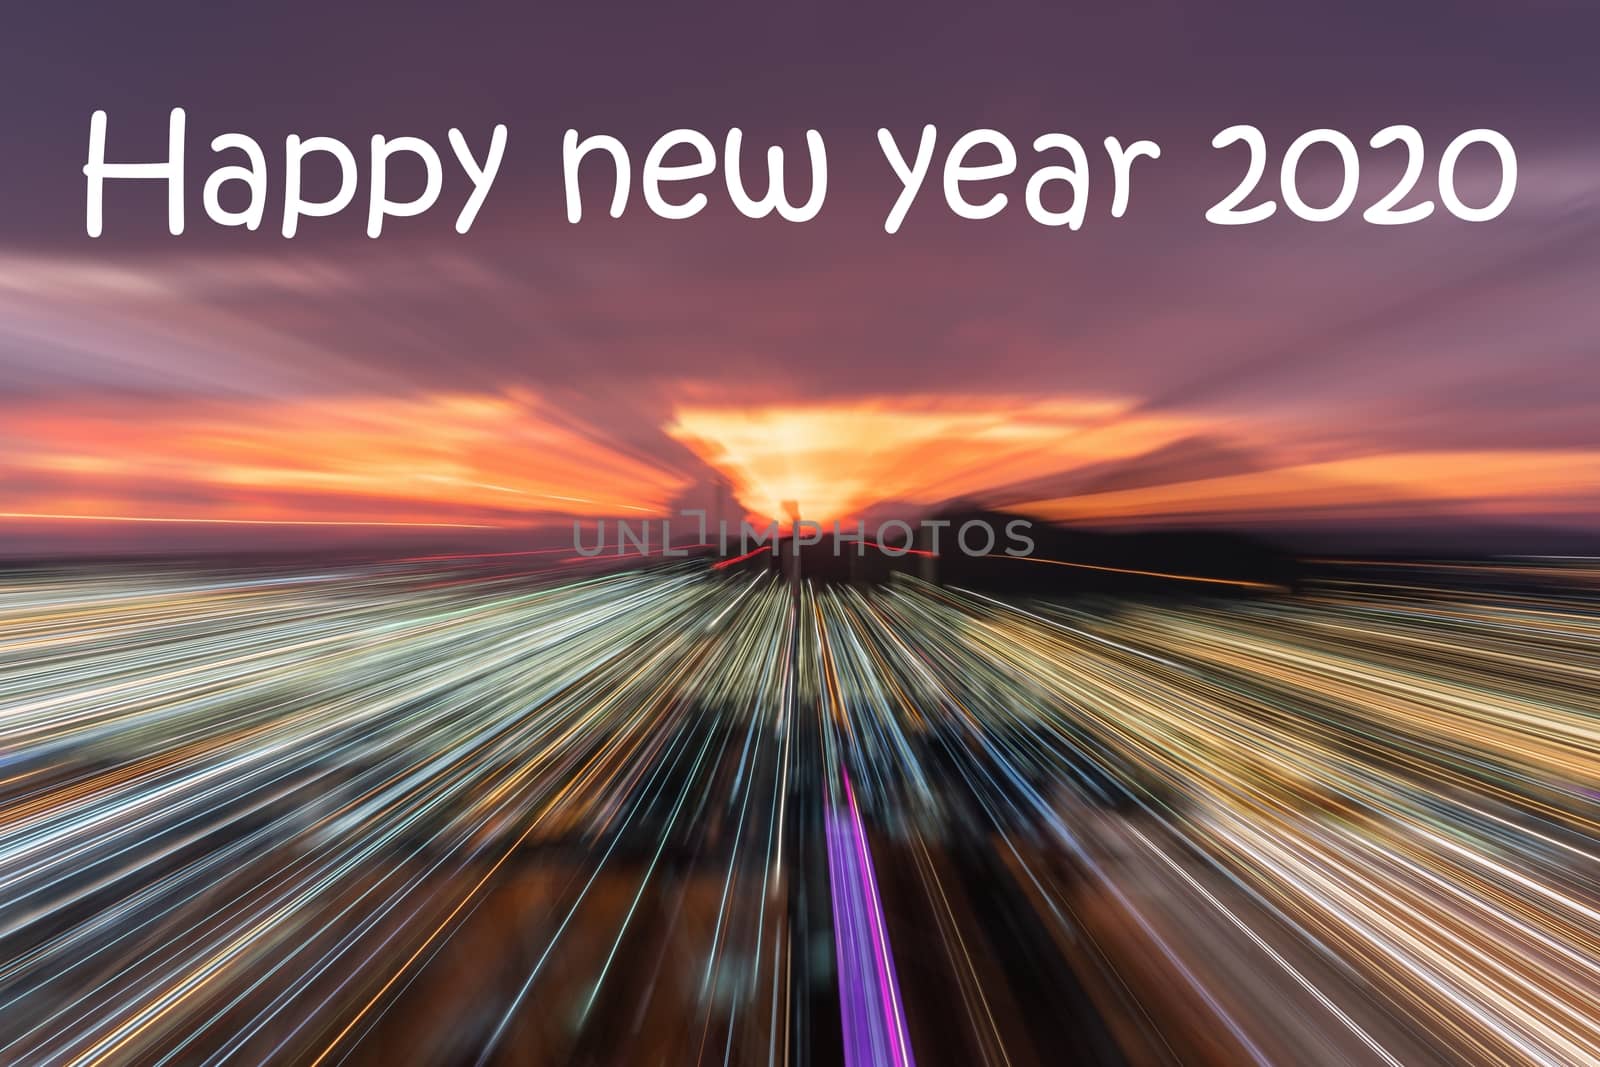 The Happy new year 2020 text on Smooth Running focus to coastal city on colorful cloudy sky background in twilight time